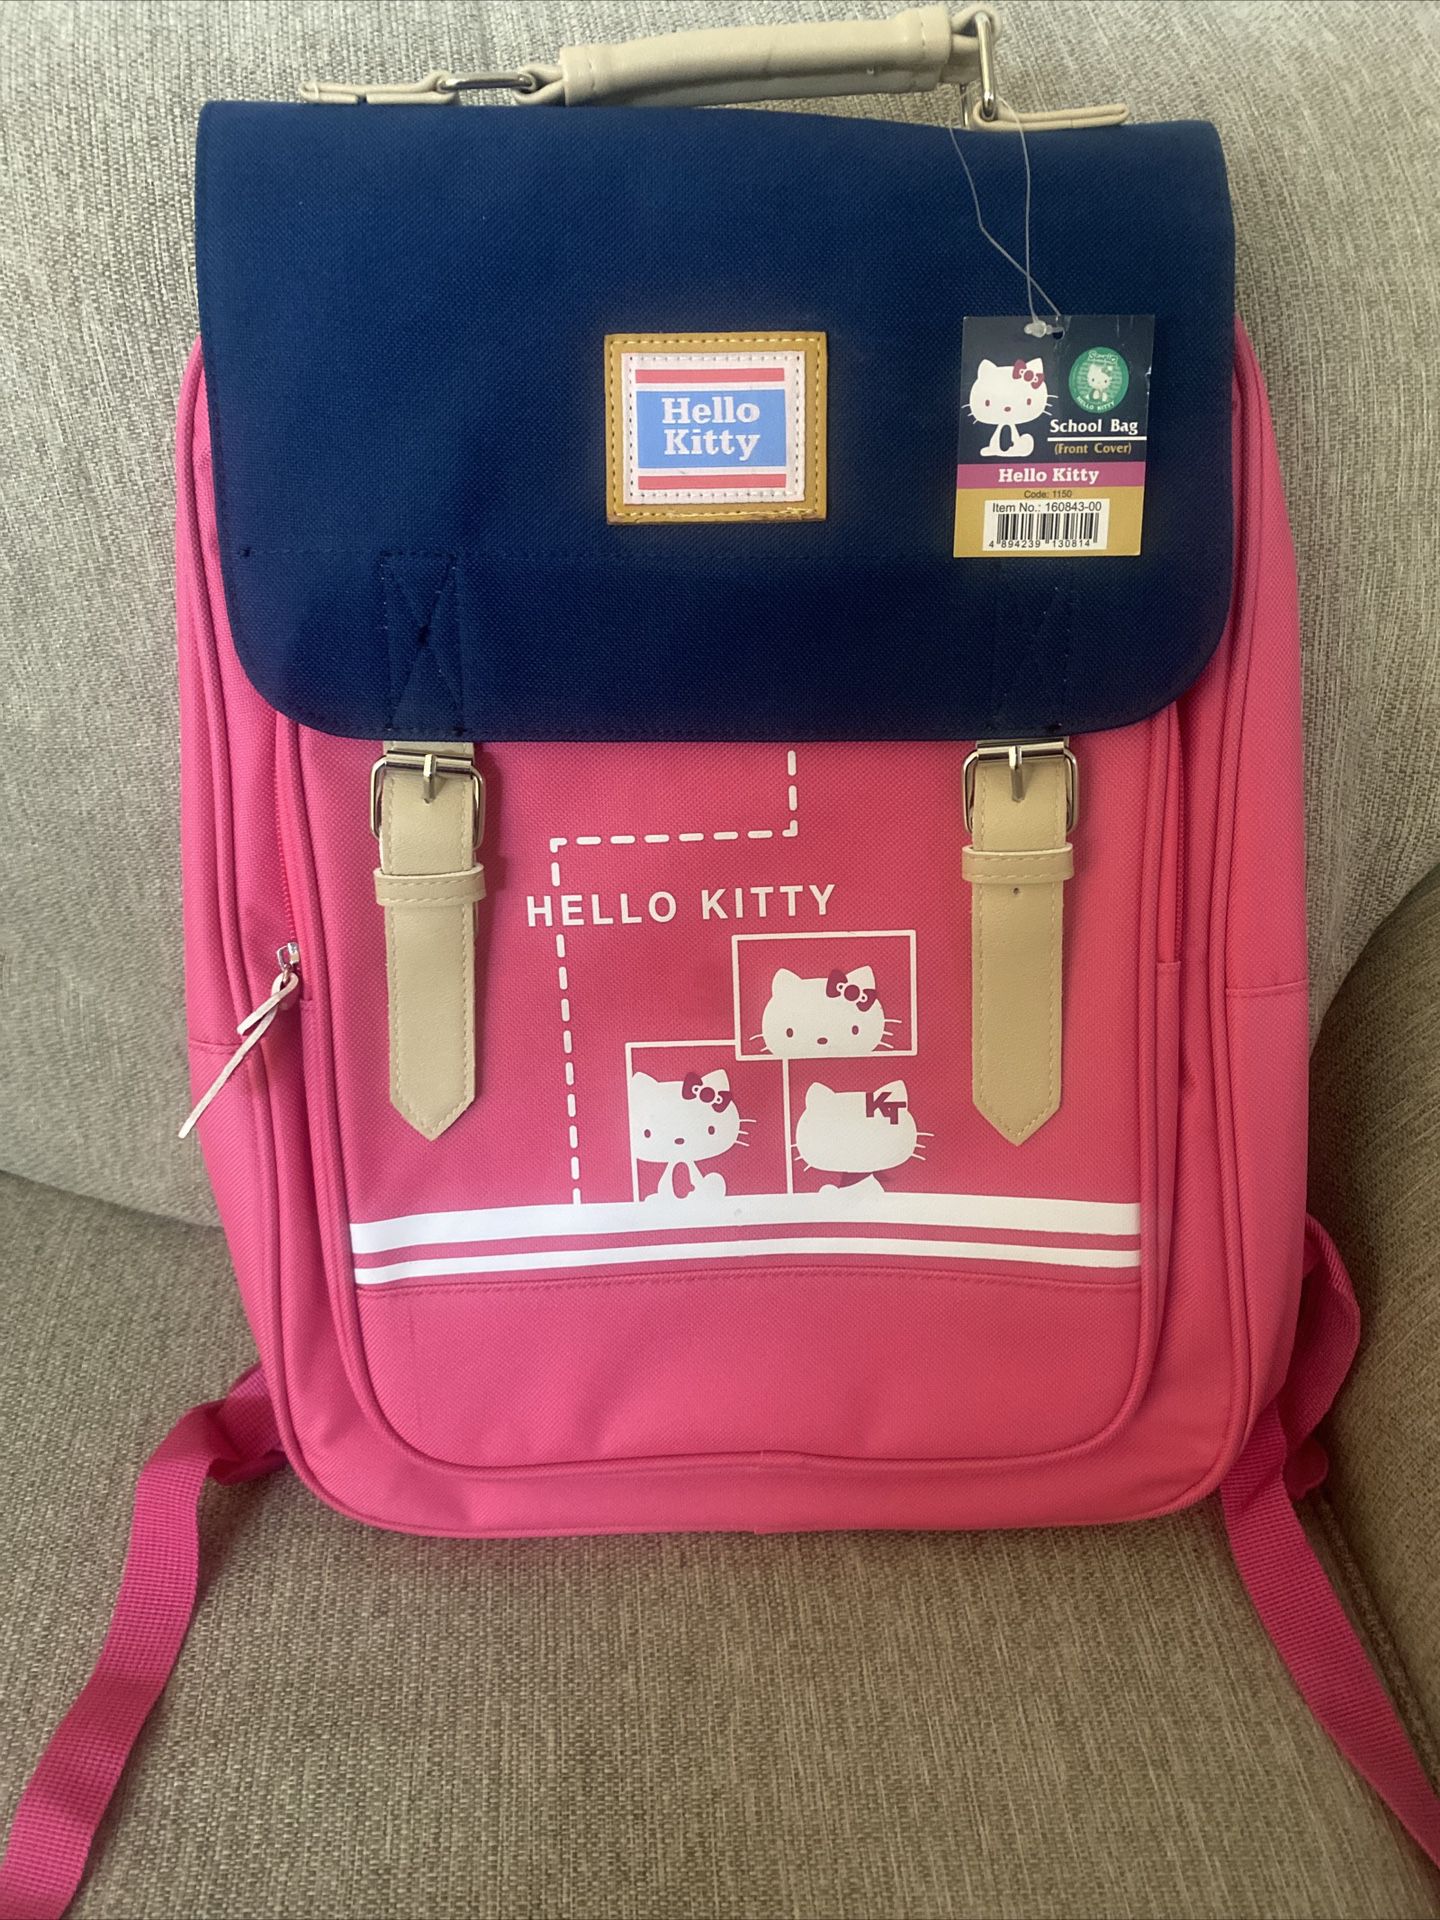 Hello Kitty Full Size Backpack By Sanrio Pink And Blue